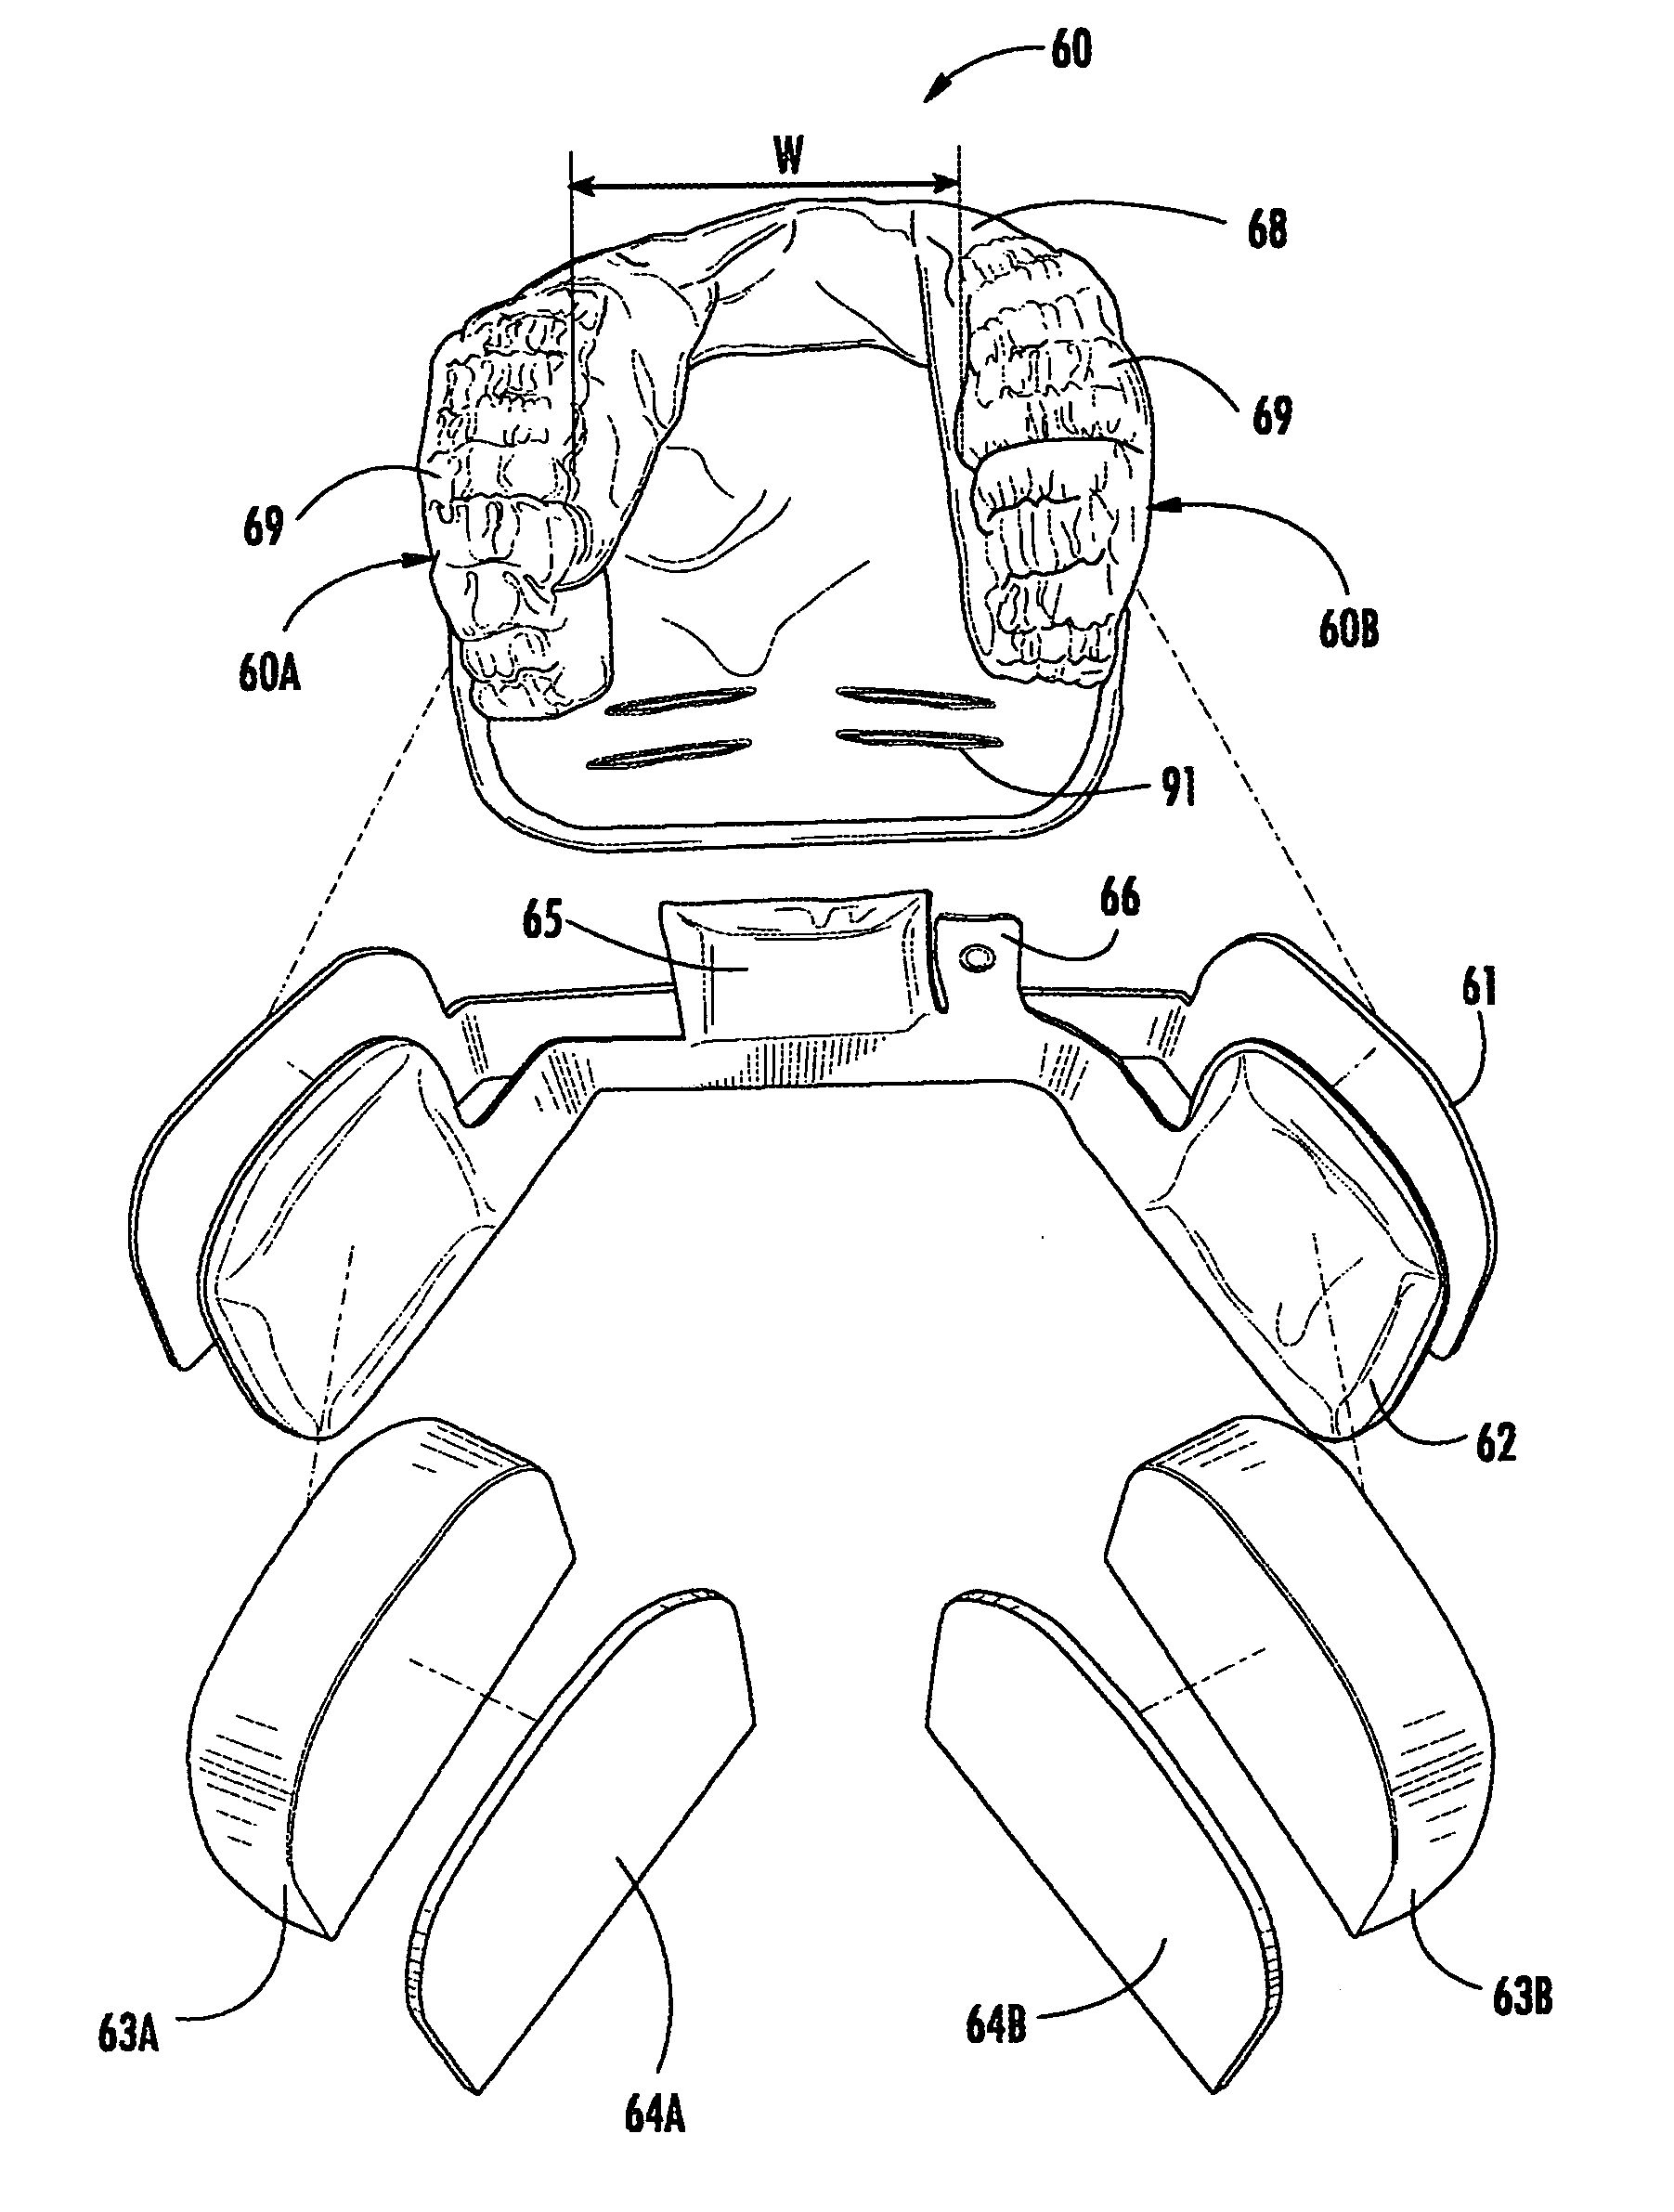 Child safety seat with adjustable head restraint